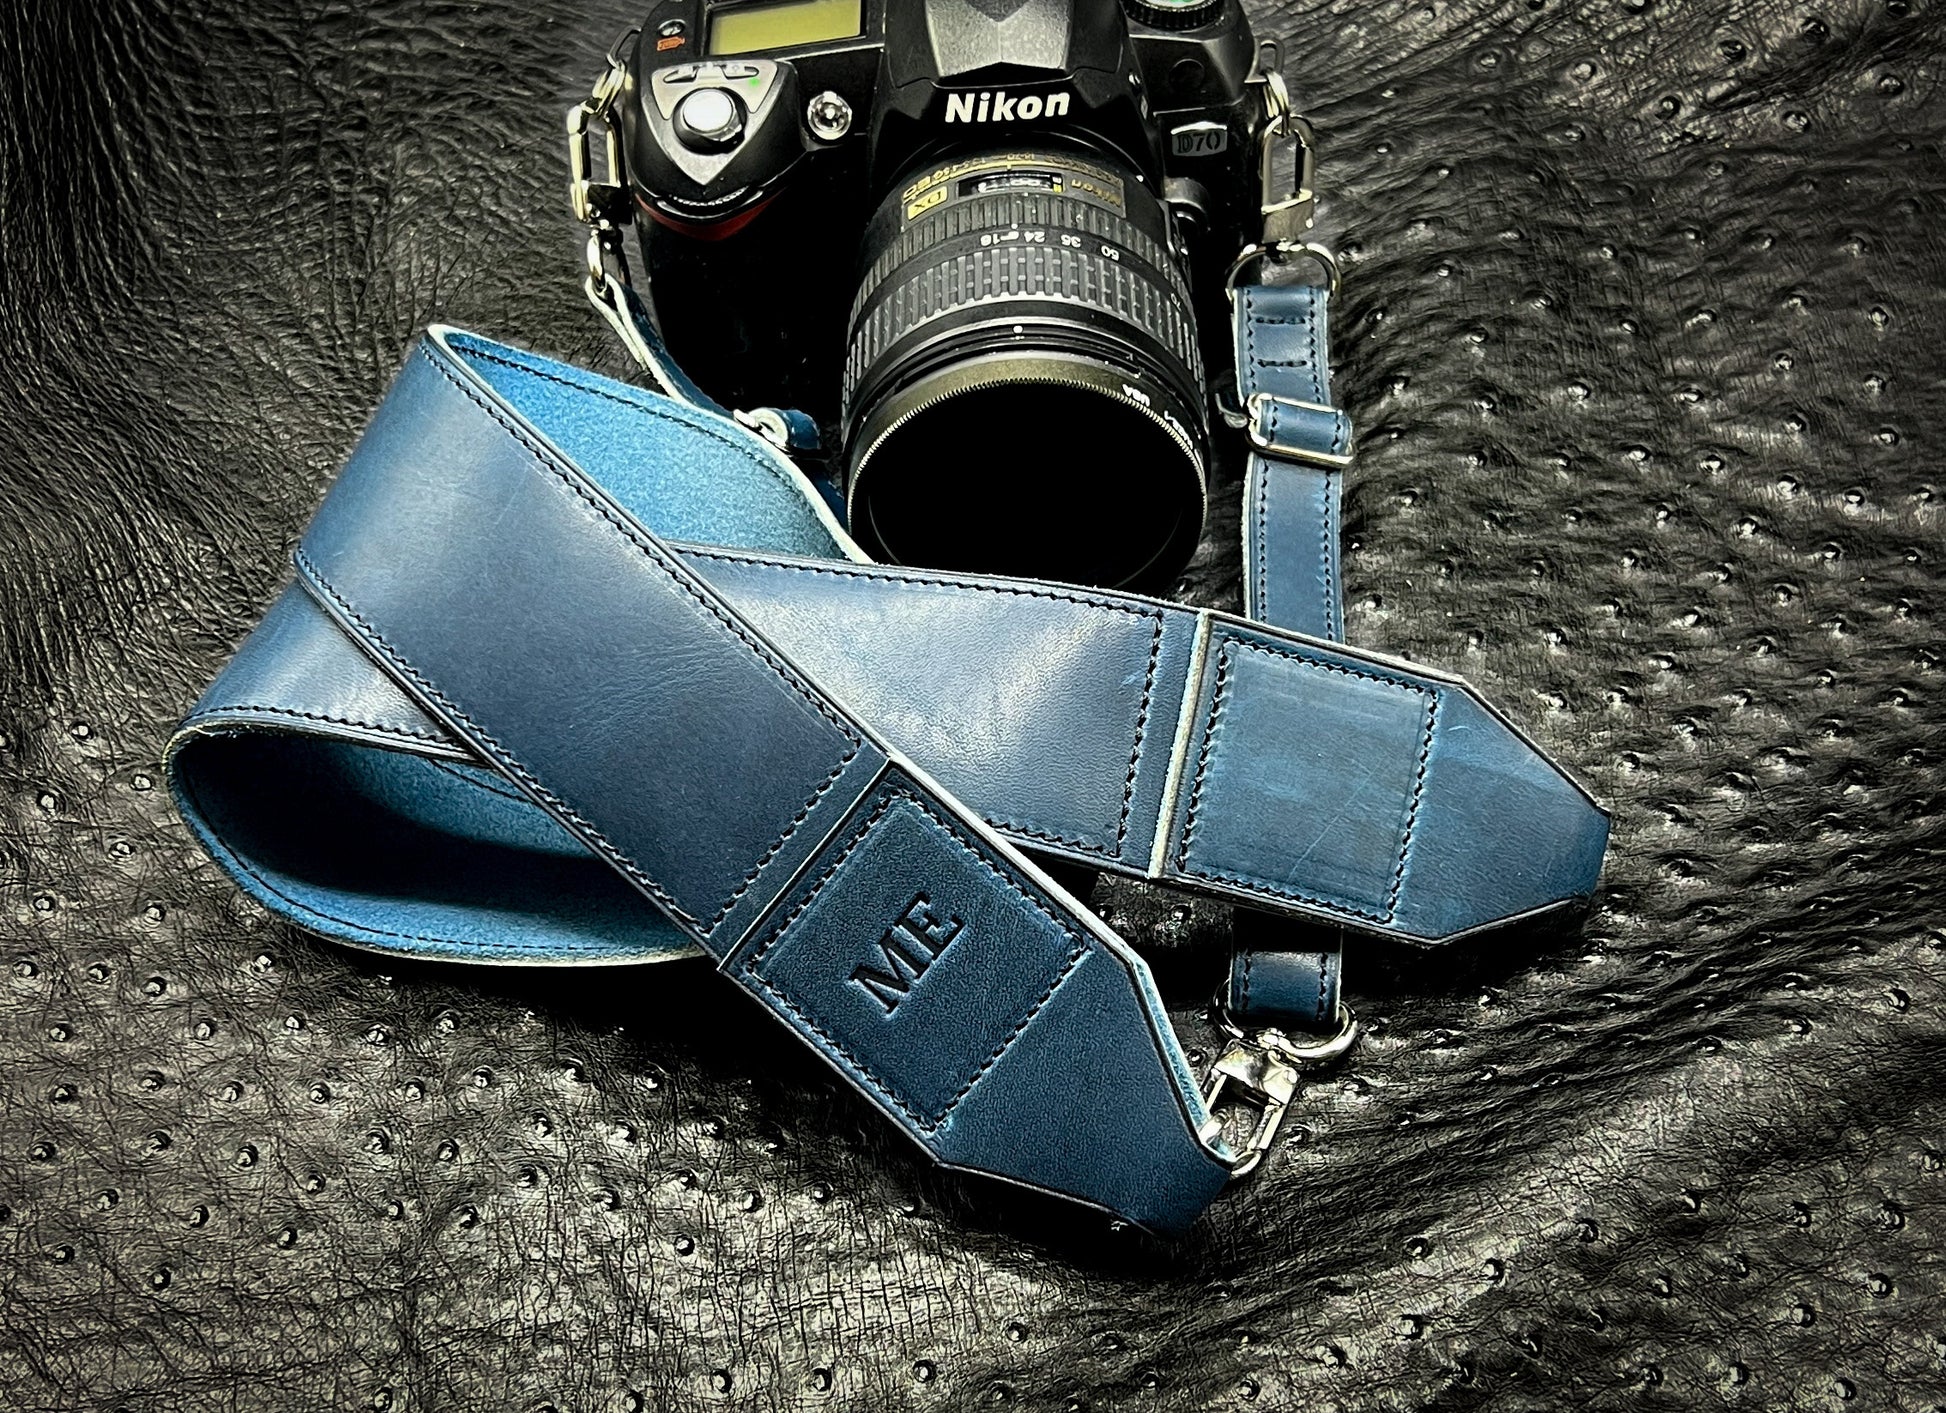  Personalized Leather Camera Straps for Photographers